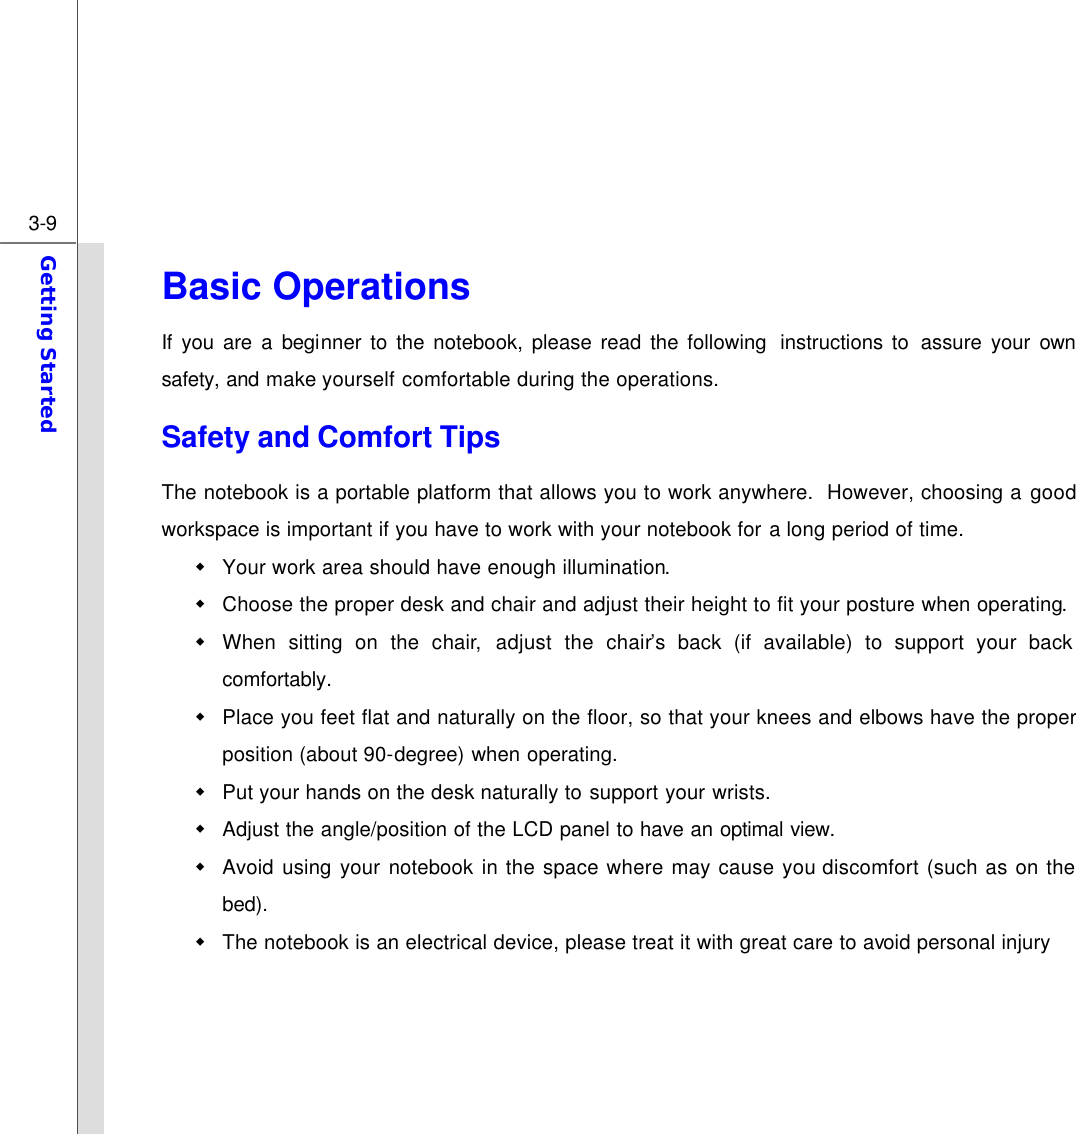  3-9 Getting Started  Basic Operations If you are a beginner to the notebook, please read the following  instructions to  assure  your own safety, and make yourself comfortable during the operations. Safety and Comfort Tips The notebook is a portable platform that allows you to work anywhere.  However, choosing a good workspace is important if you have to work with your notebook for a long period of time. w Your work area should have enough illumination. w Choose the proper desk and chair and adjust their height to fit your posture when operating. w When sitting on the chair,  adjust the chair’s back (if available) to support your back comfortably. w Place you feet flat and naturally on the floor, so that your knees and elbows have the proper position (about 90-degree) when operating. w Put your hands on the desk naturally to support your wrists. w Adjust the angle/position of the LCD panel to have an optimal view. w Avoid using your notebook in the space where may cause you discomfort (such as on the bed). w The notebook is an electrical device, please treat it with great care to avoid personal injury     